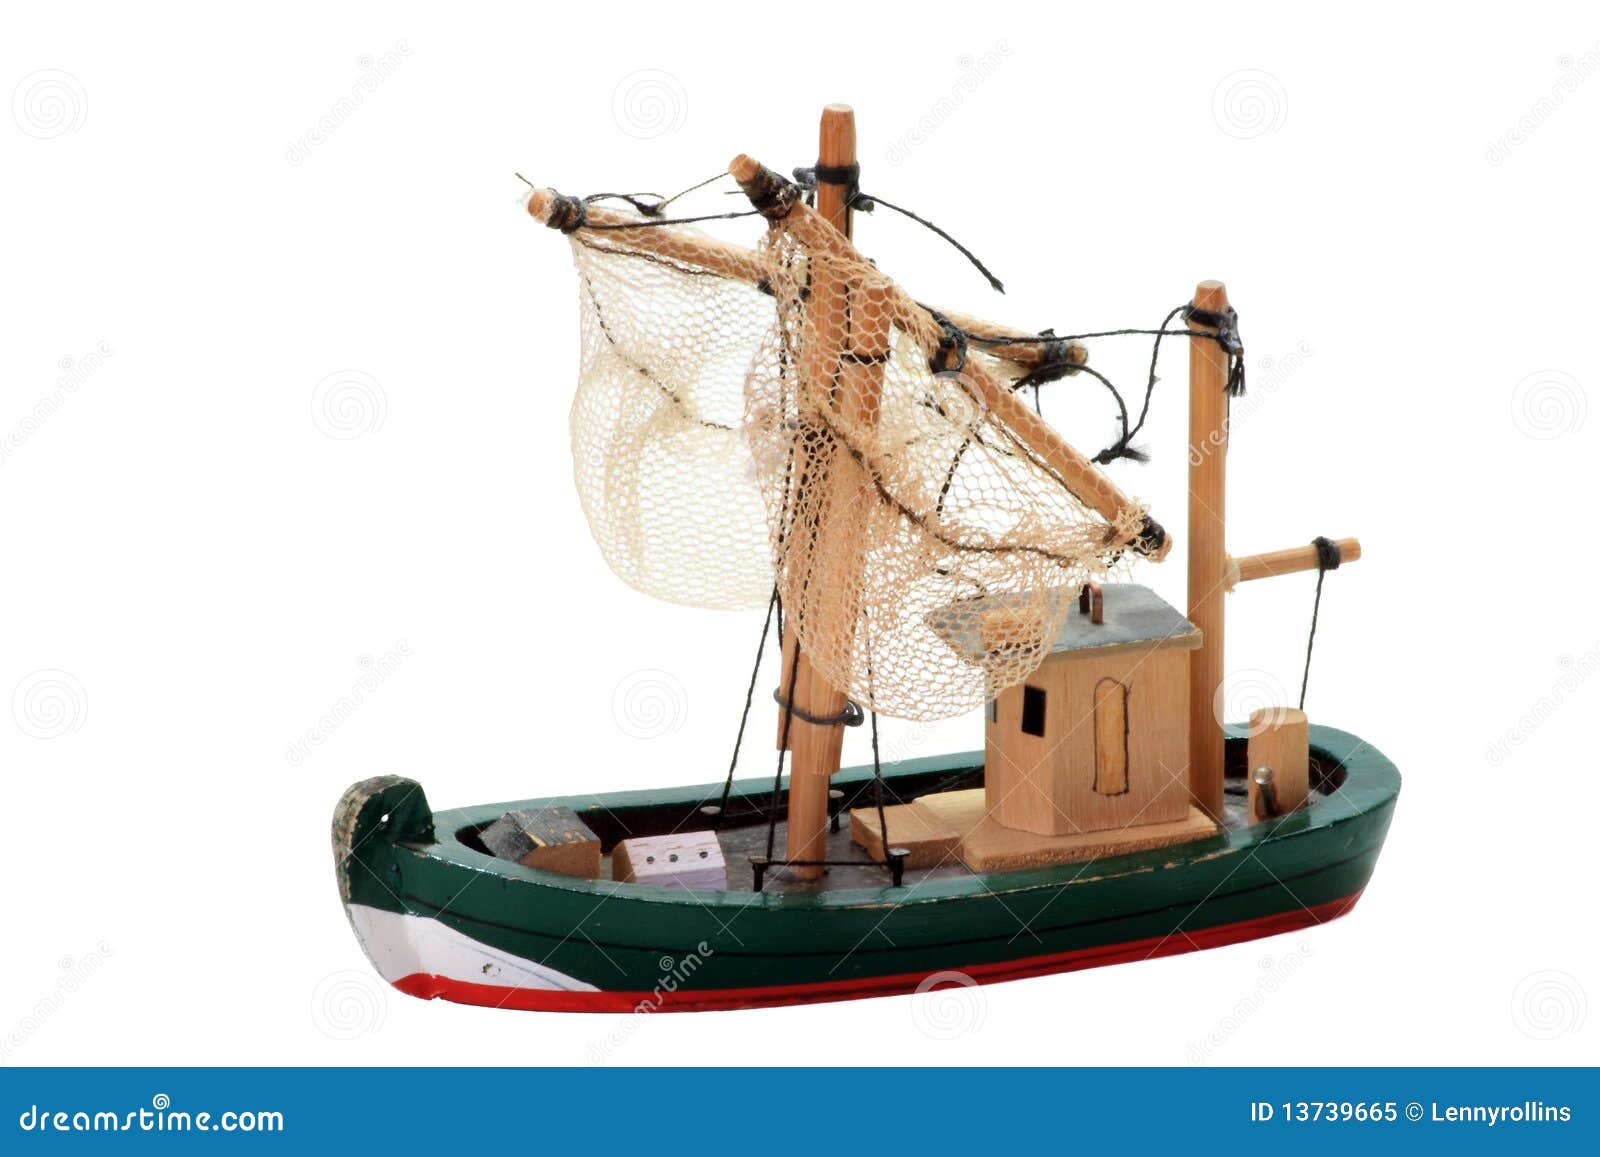 Wooden Fishing Boat Toy Royalty Free Stock Photo - Image: 13739665